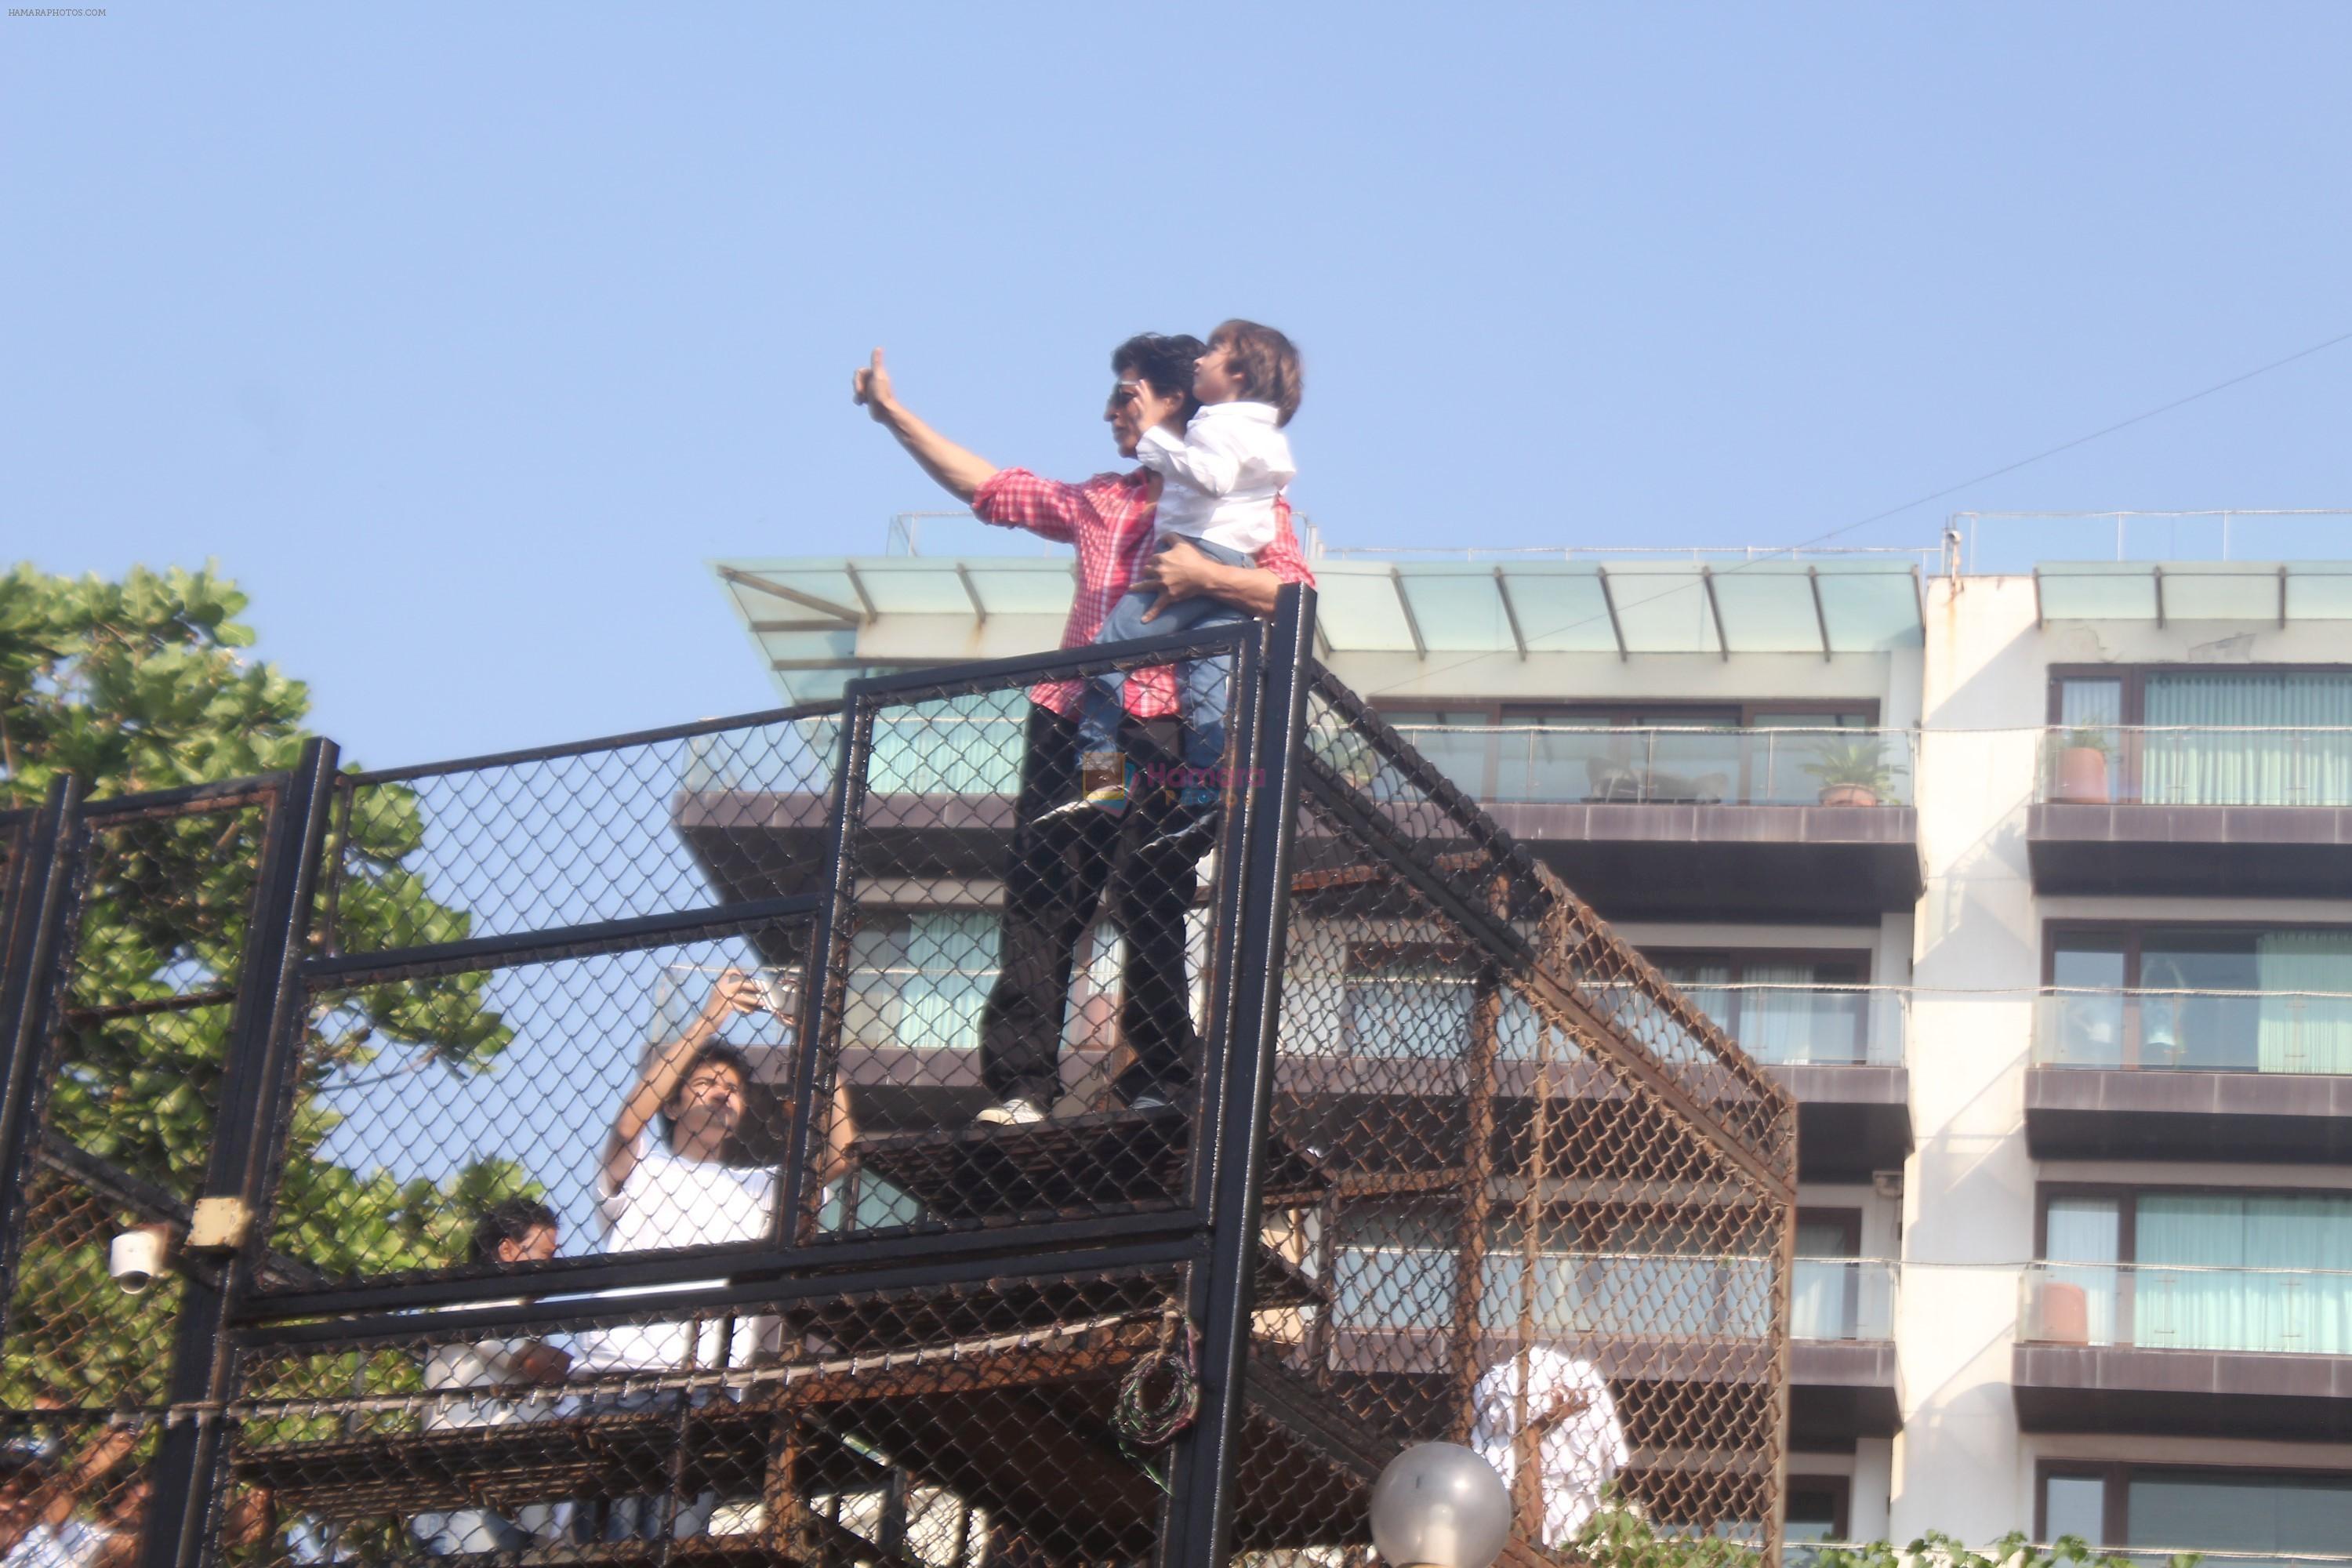 Shahrukh Khan And AbRam WAVES At FANS Outside Mannat 53rd Birthday Celebration With Fans on 2nd Nov 2018